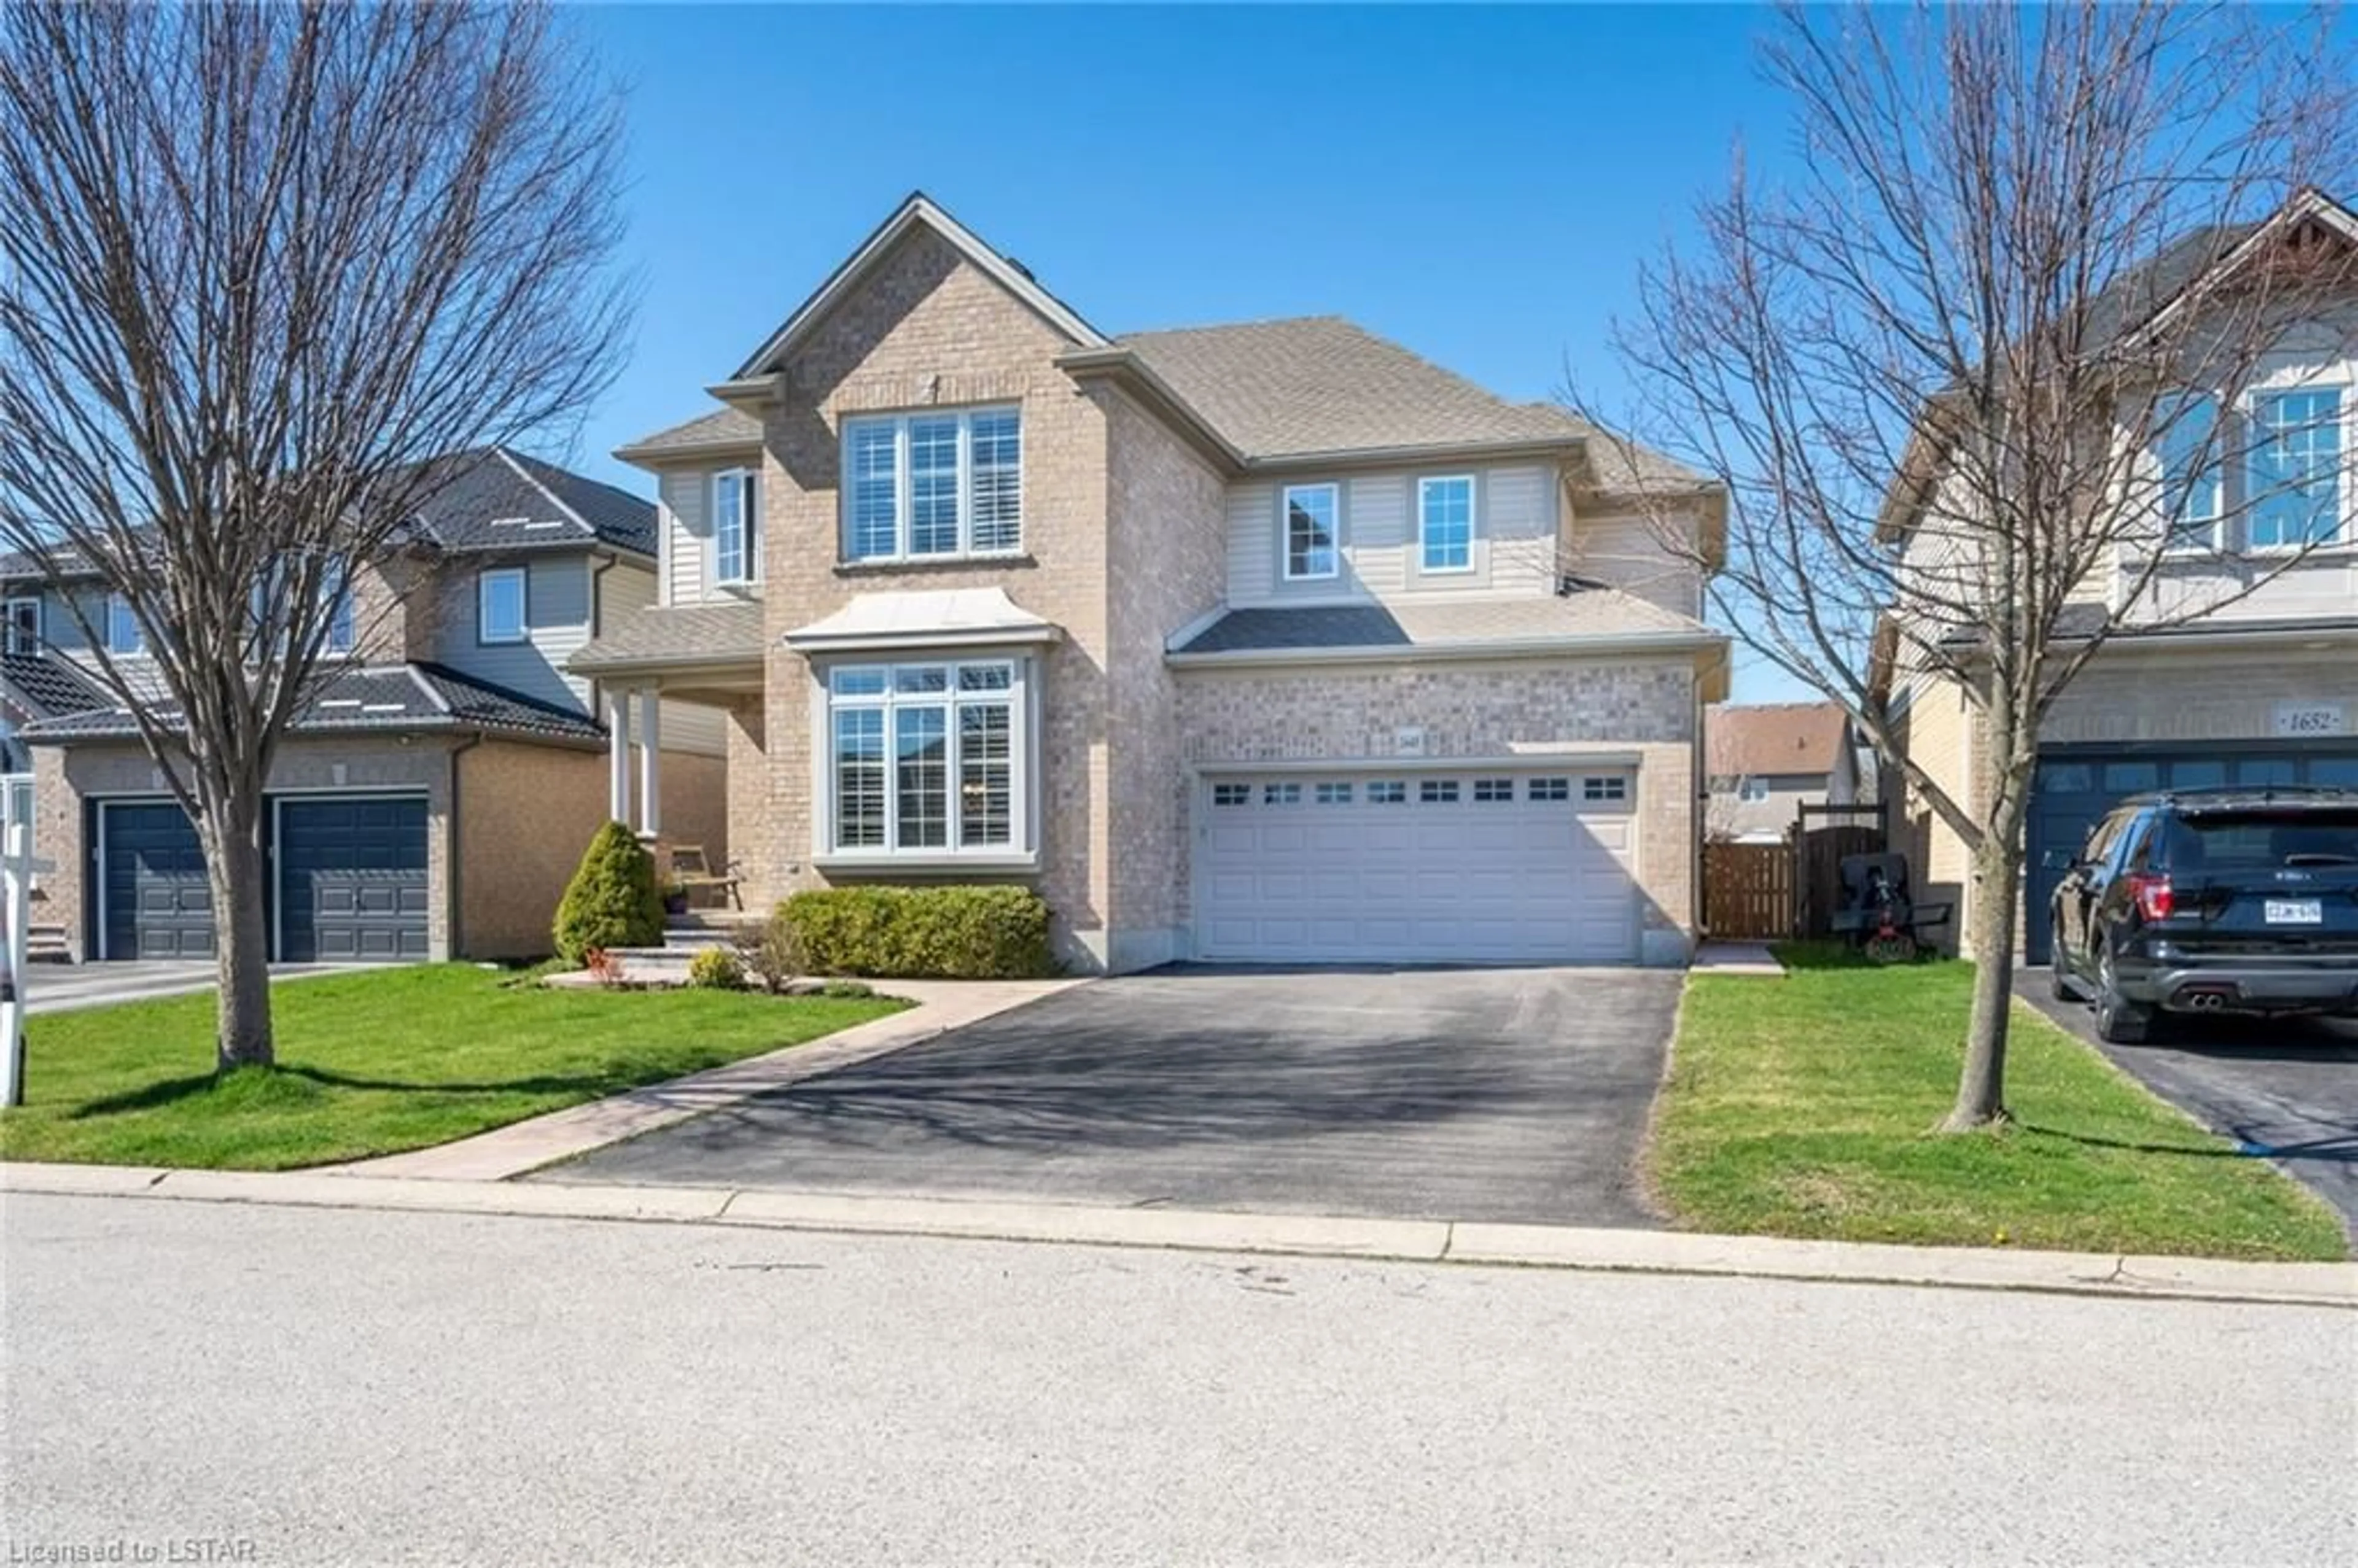 Frontside or backside of a home for 1648 Portrush Way, London Ontario N5X 0C1